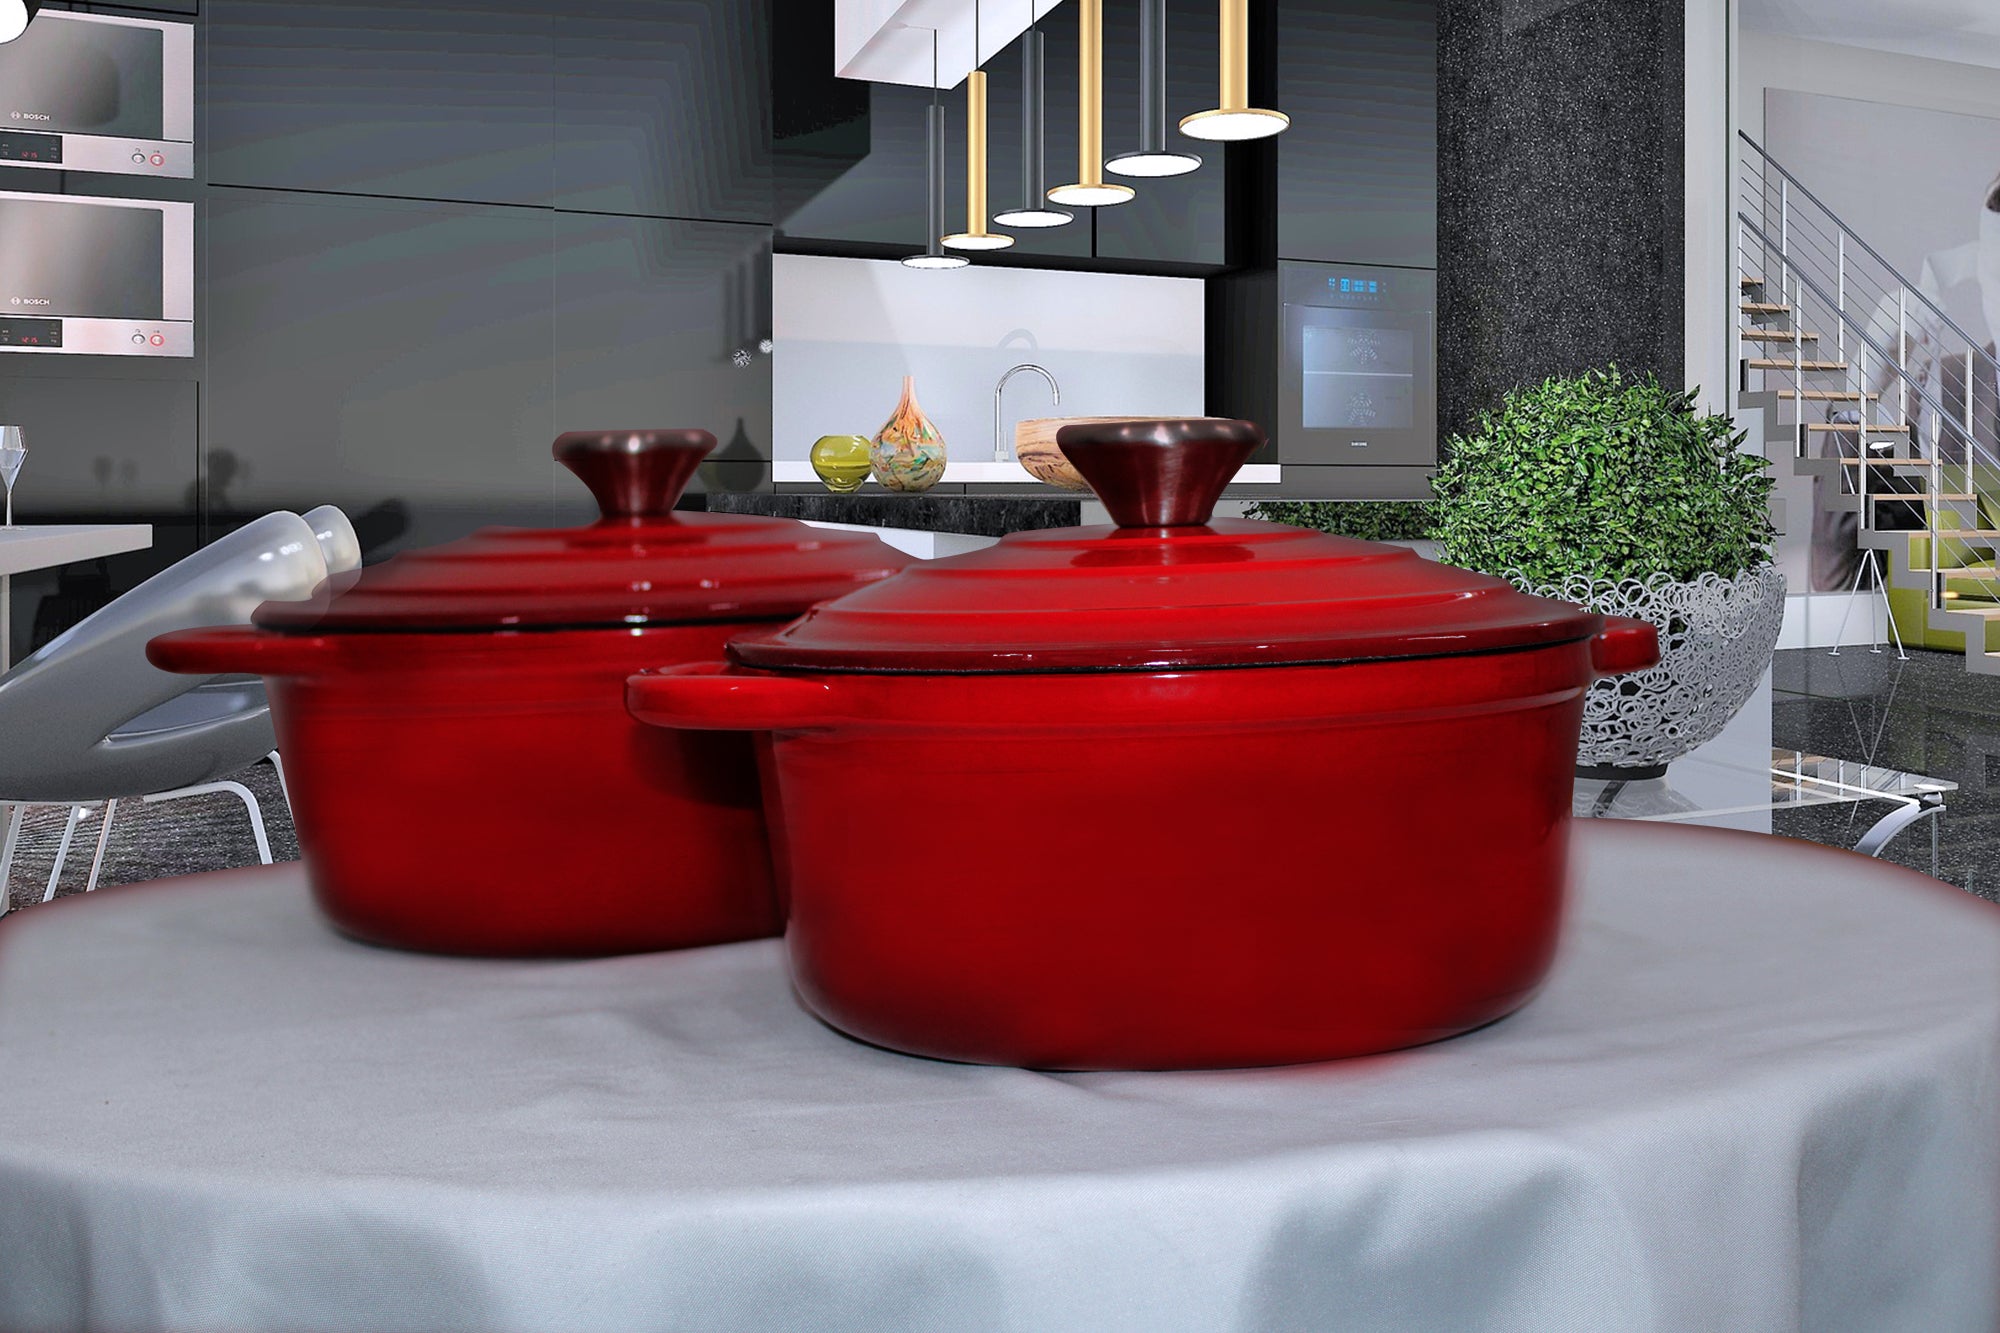 LMA Authentic 7 Piece Cast Iron Dutch Oven Cookware Set - Red